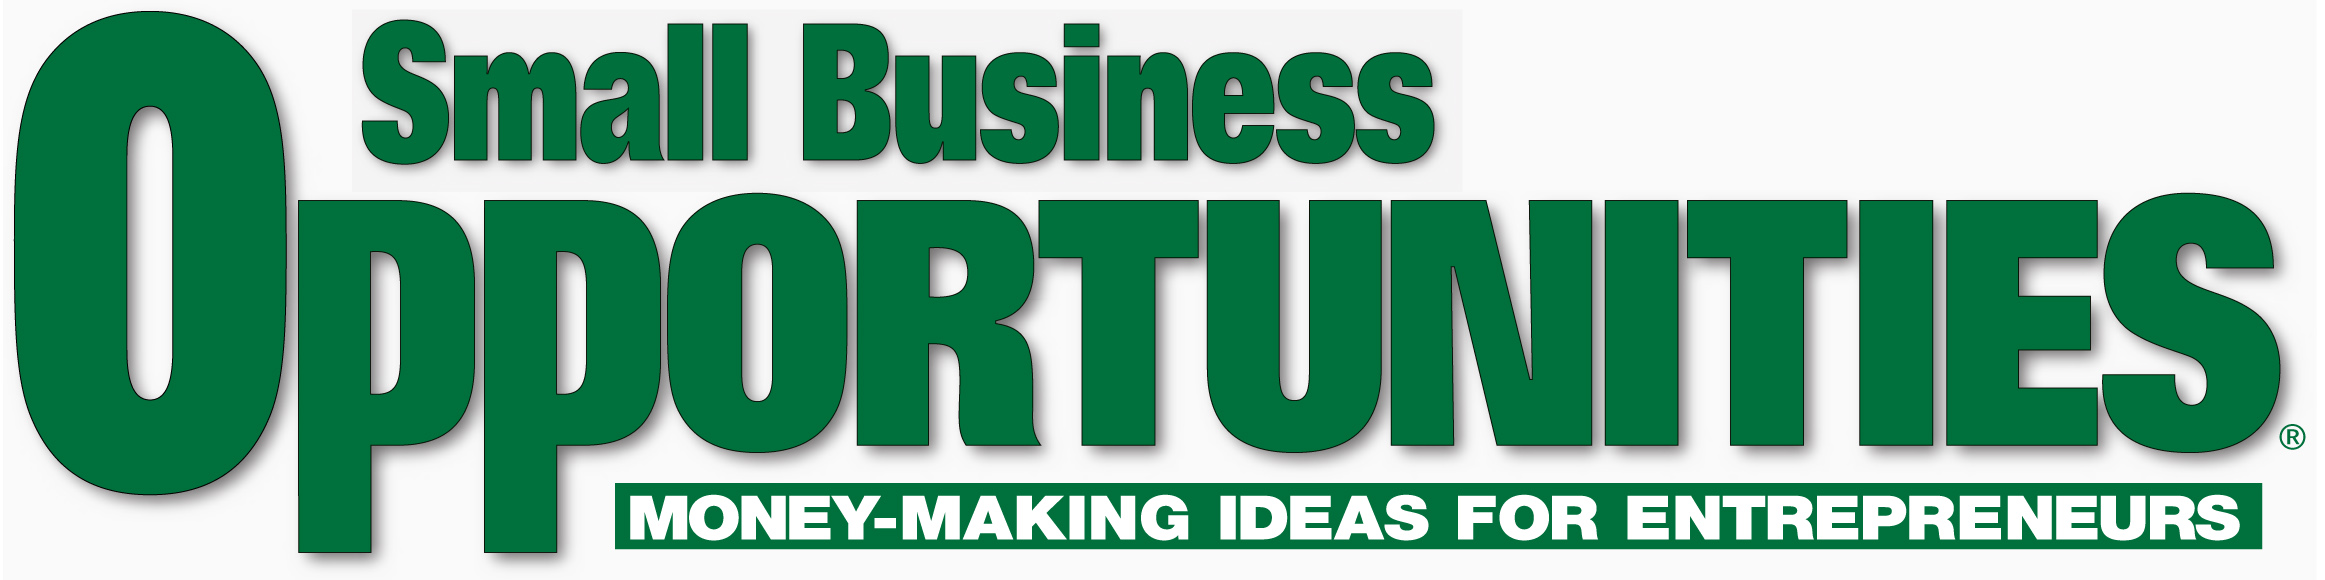 Small Business Opportunities Magazine Subscriptions | Renewals | Gifts